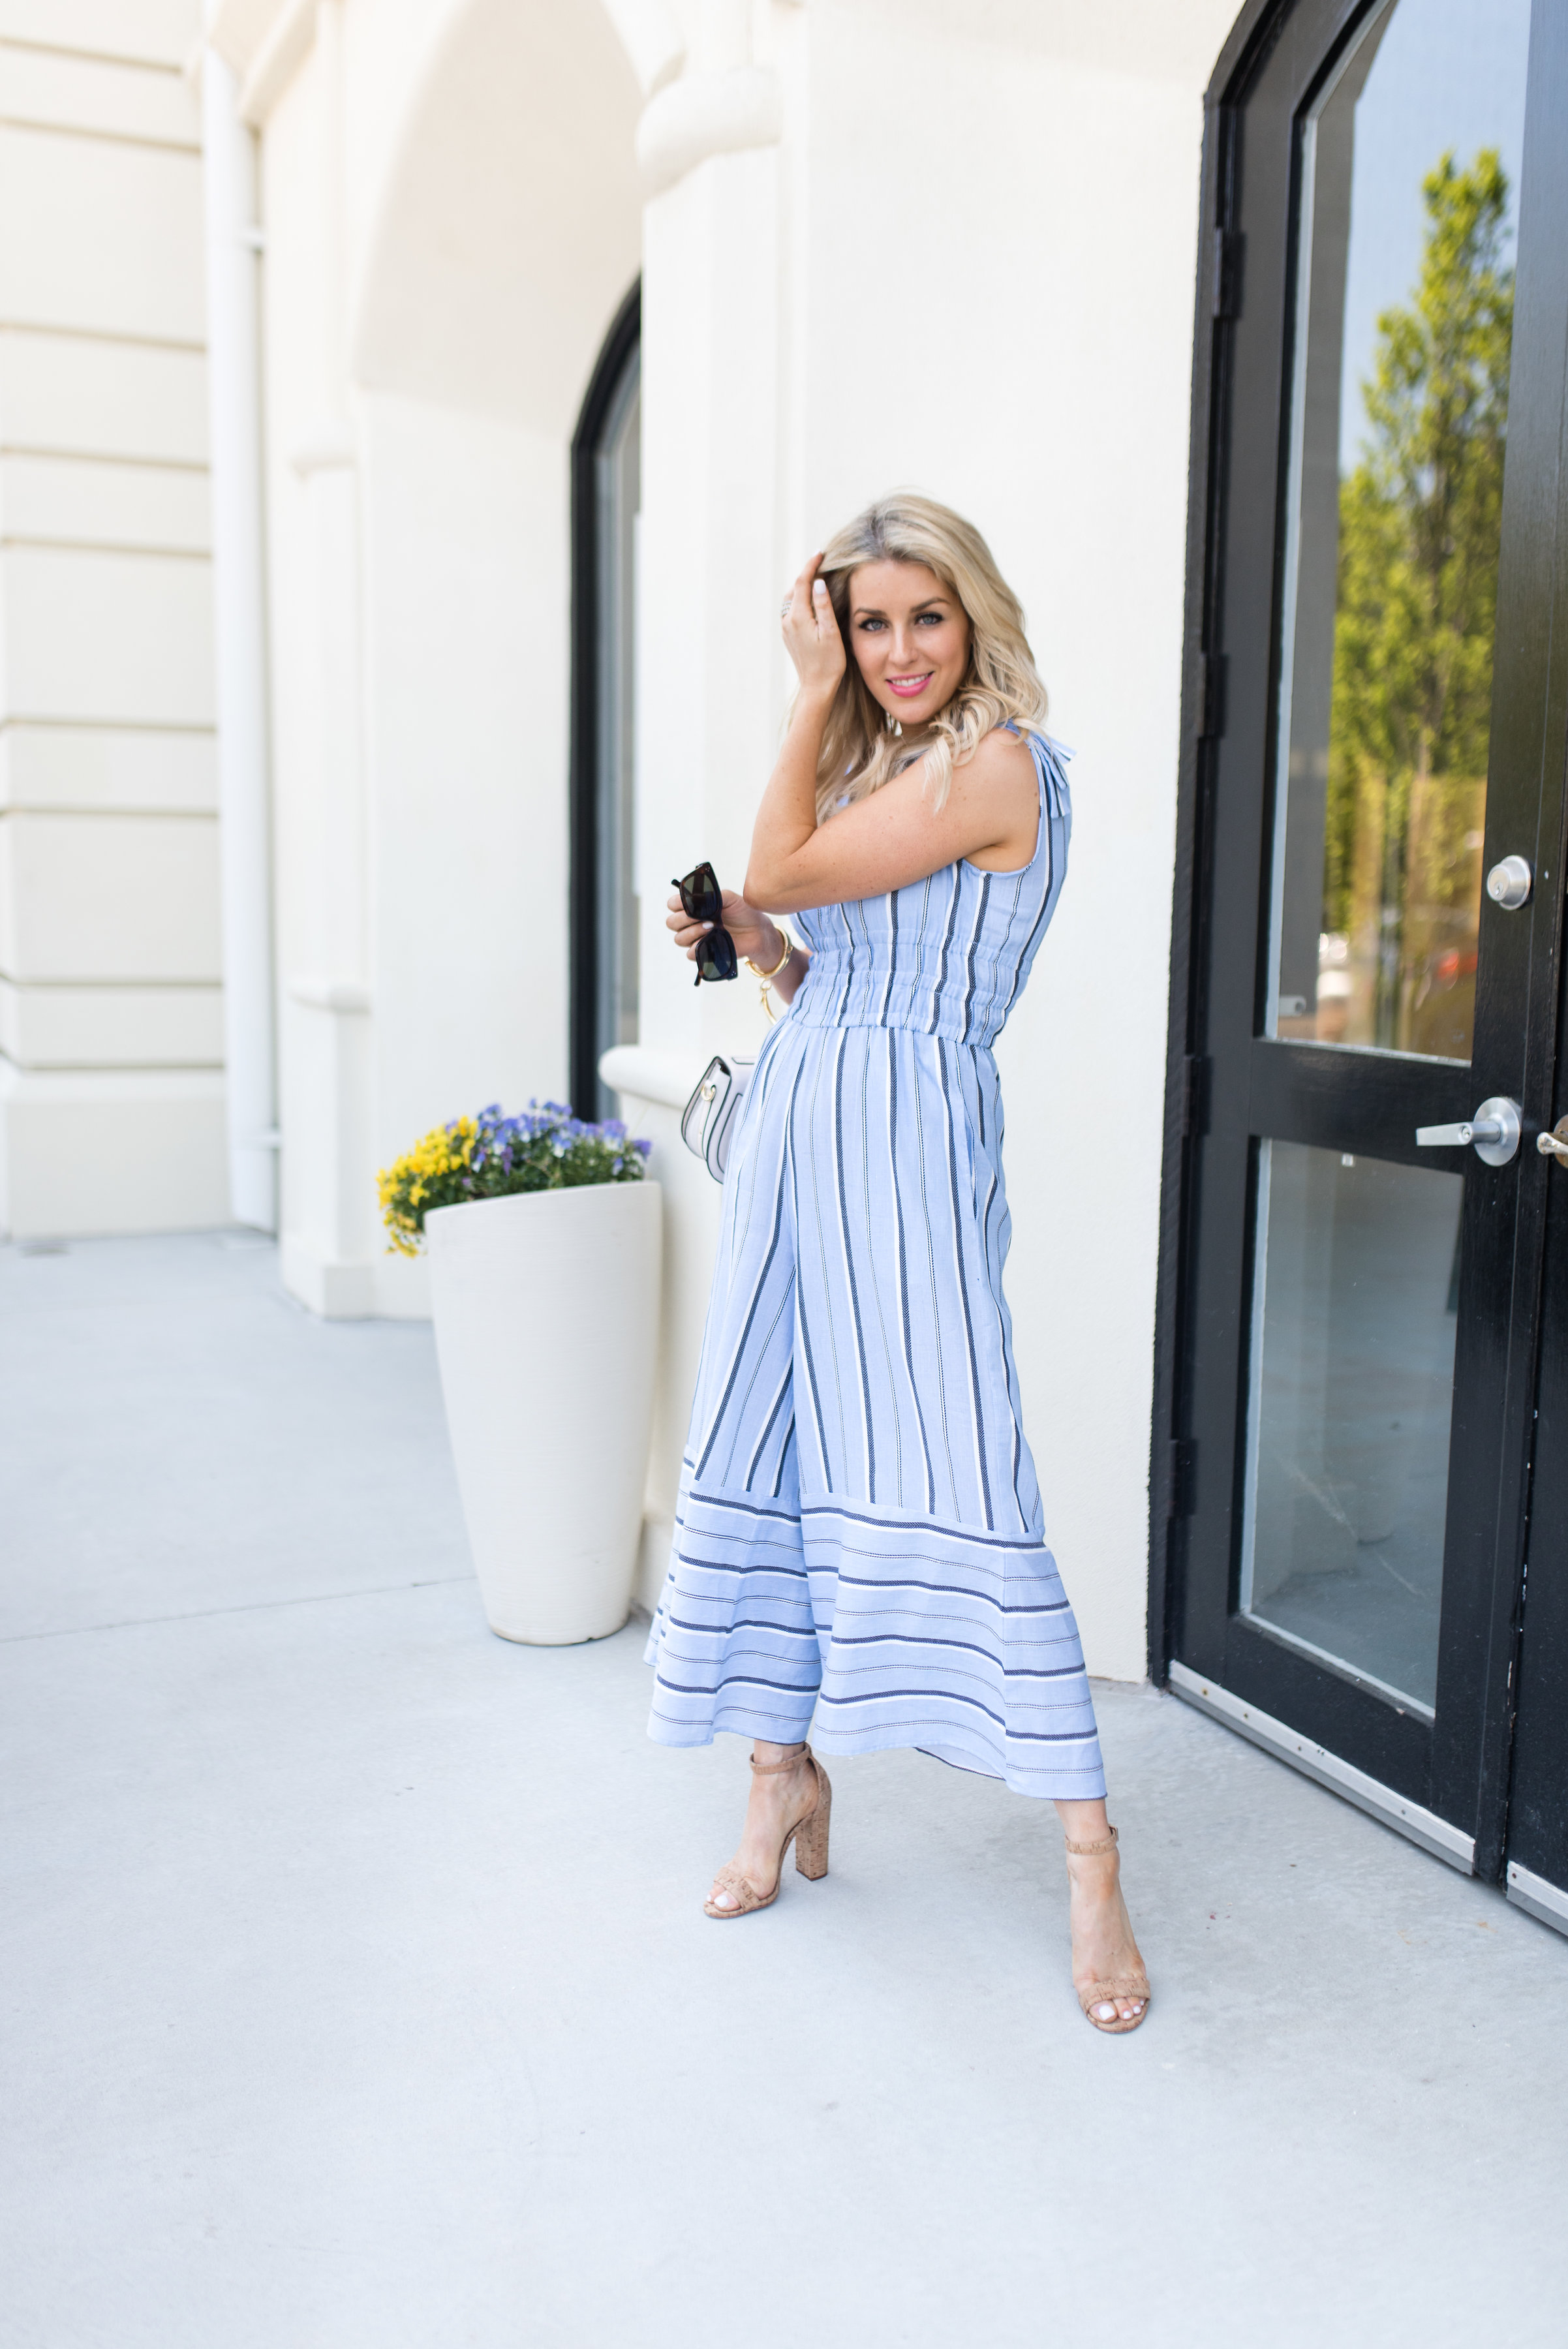 Jumpsuit You Need for Summer